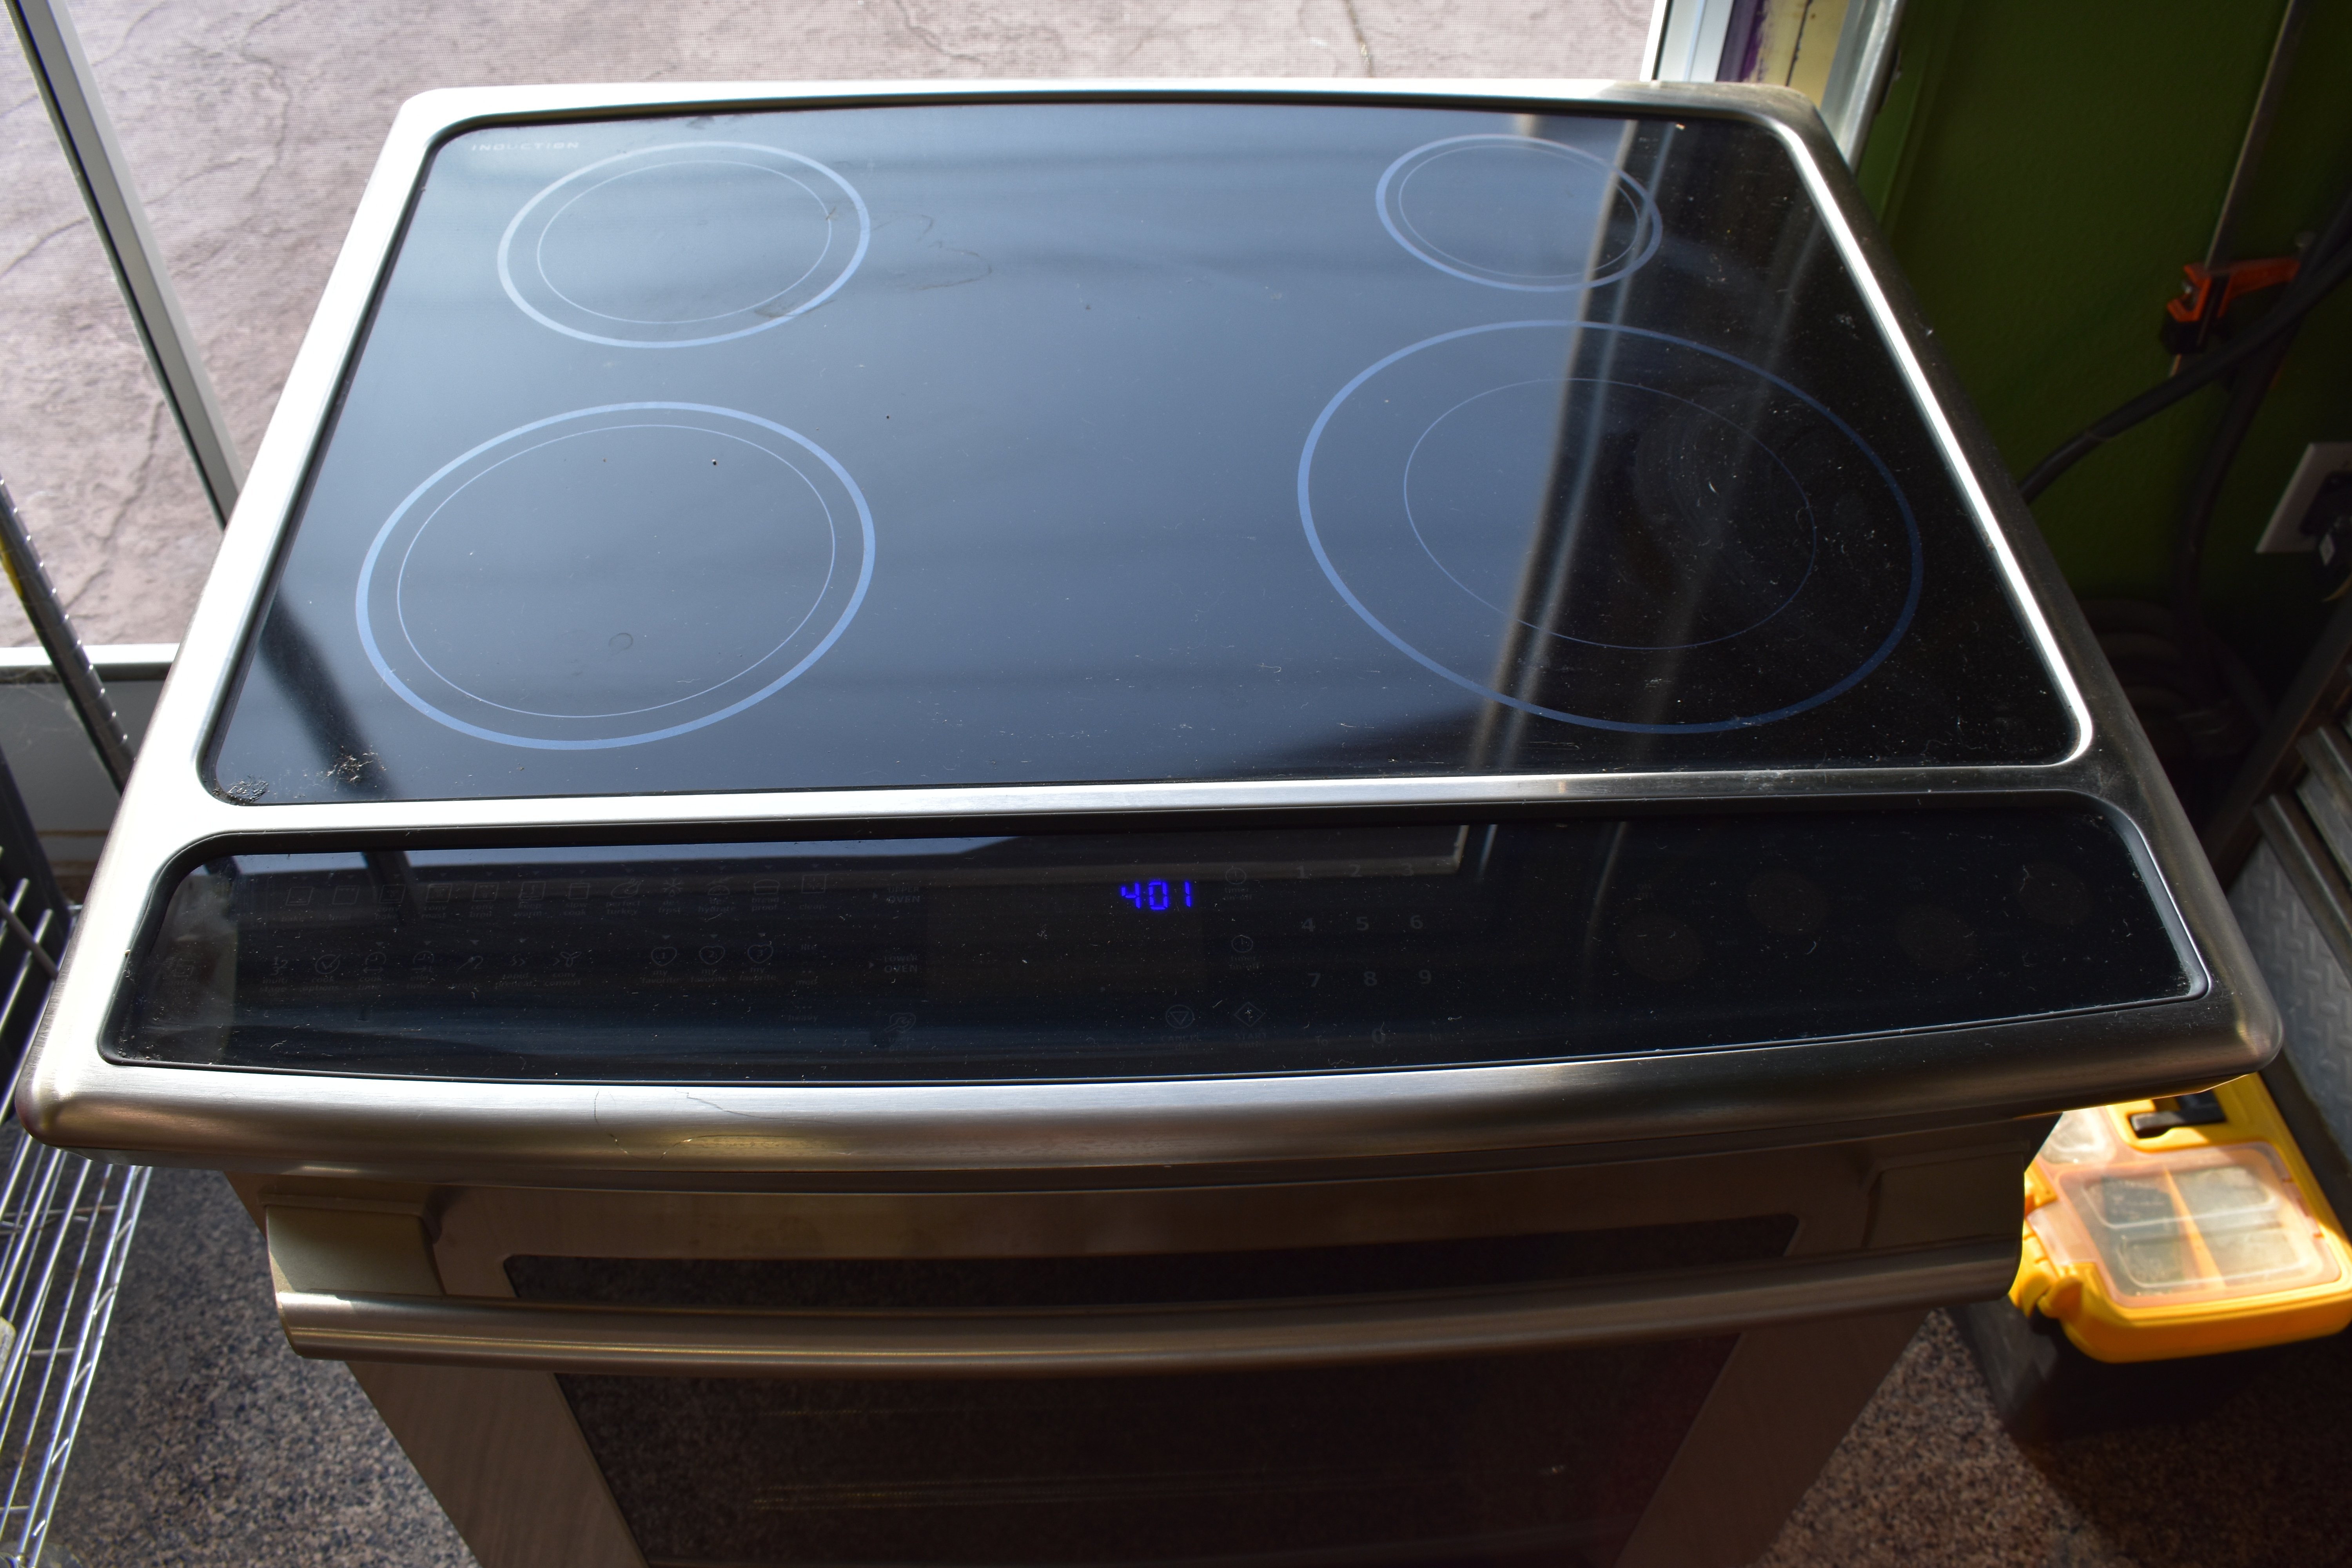 an induction cooktop